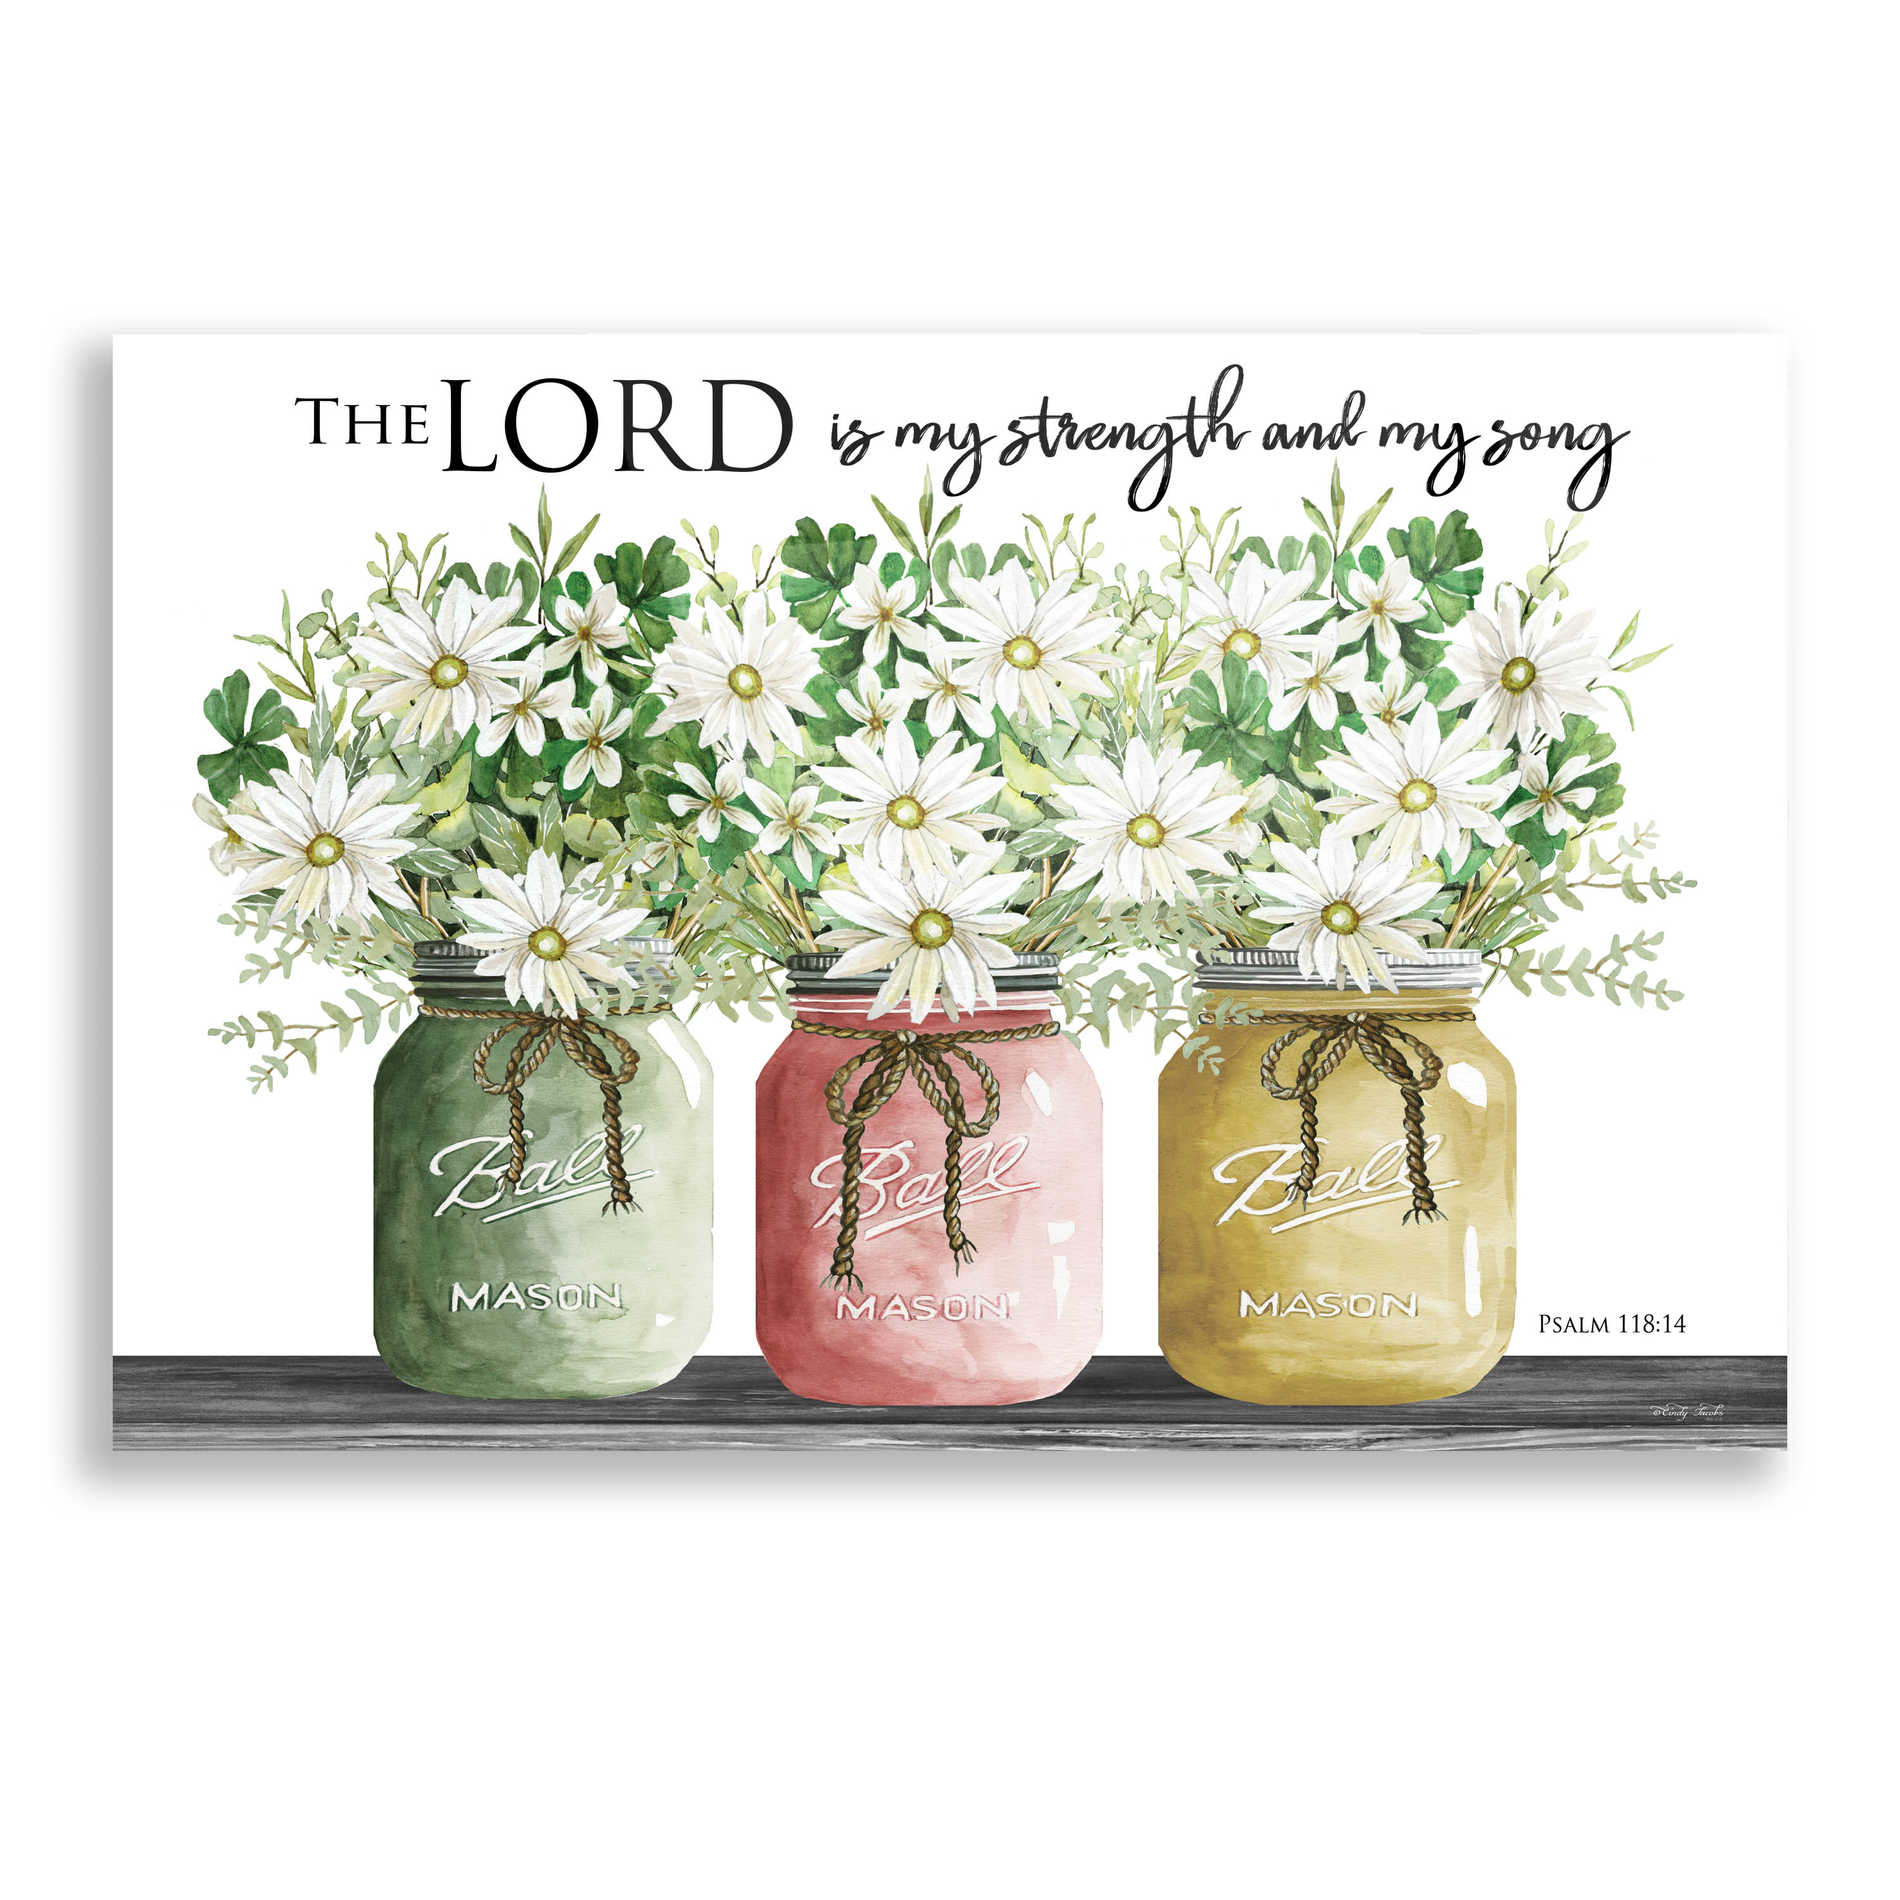 Epic Art 'The Lord is My Strength and My Song' by Cindy Jacobs, Acrylic Glass Wall Art,16x12